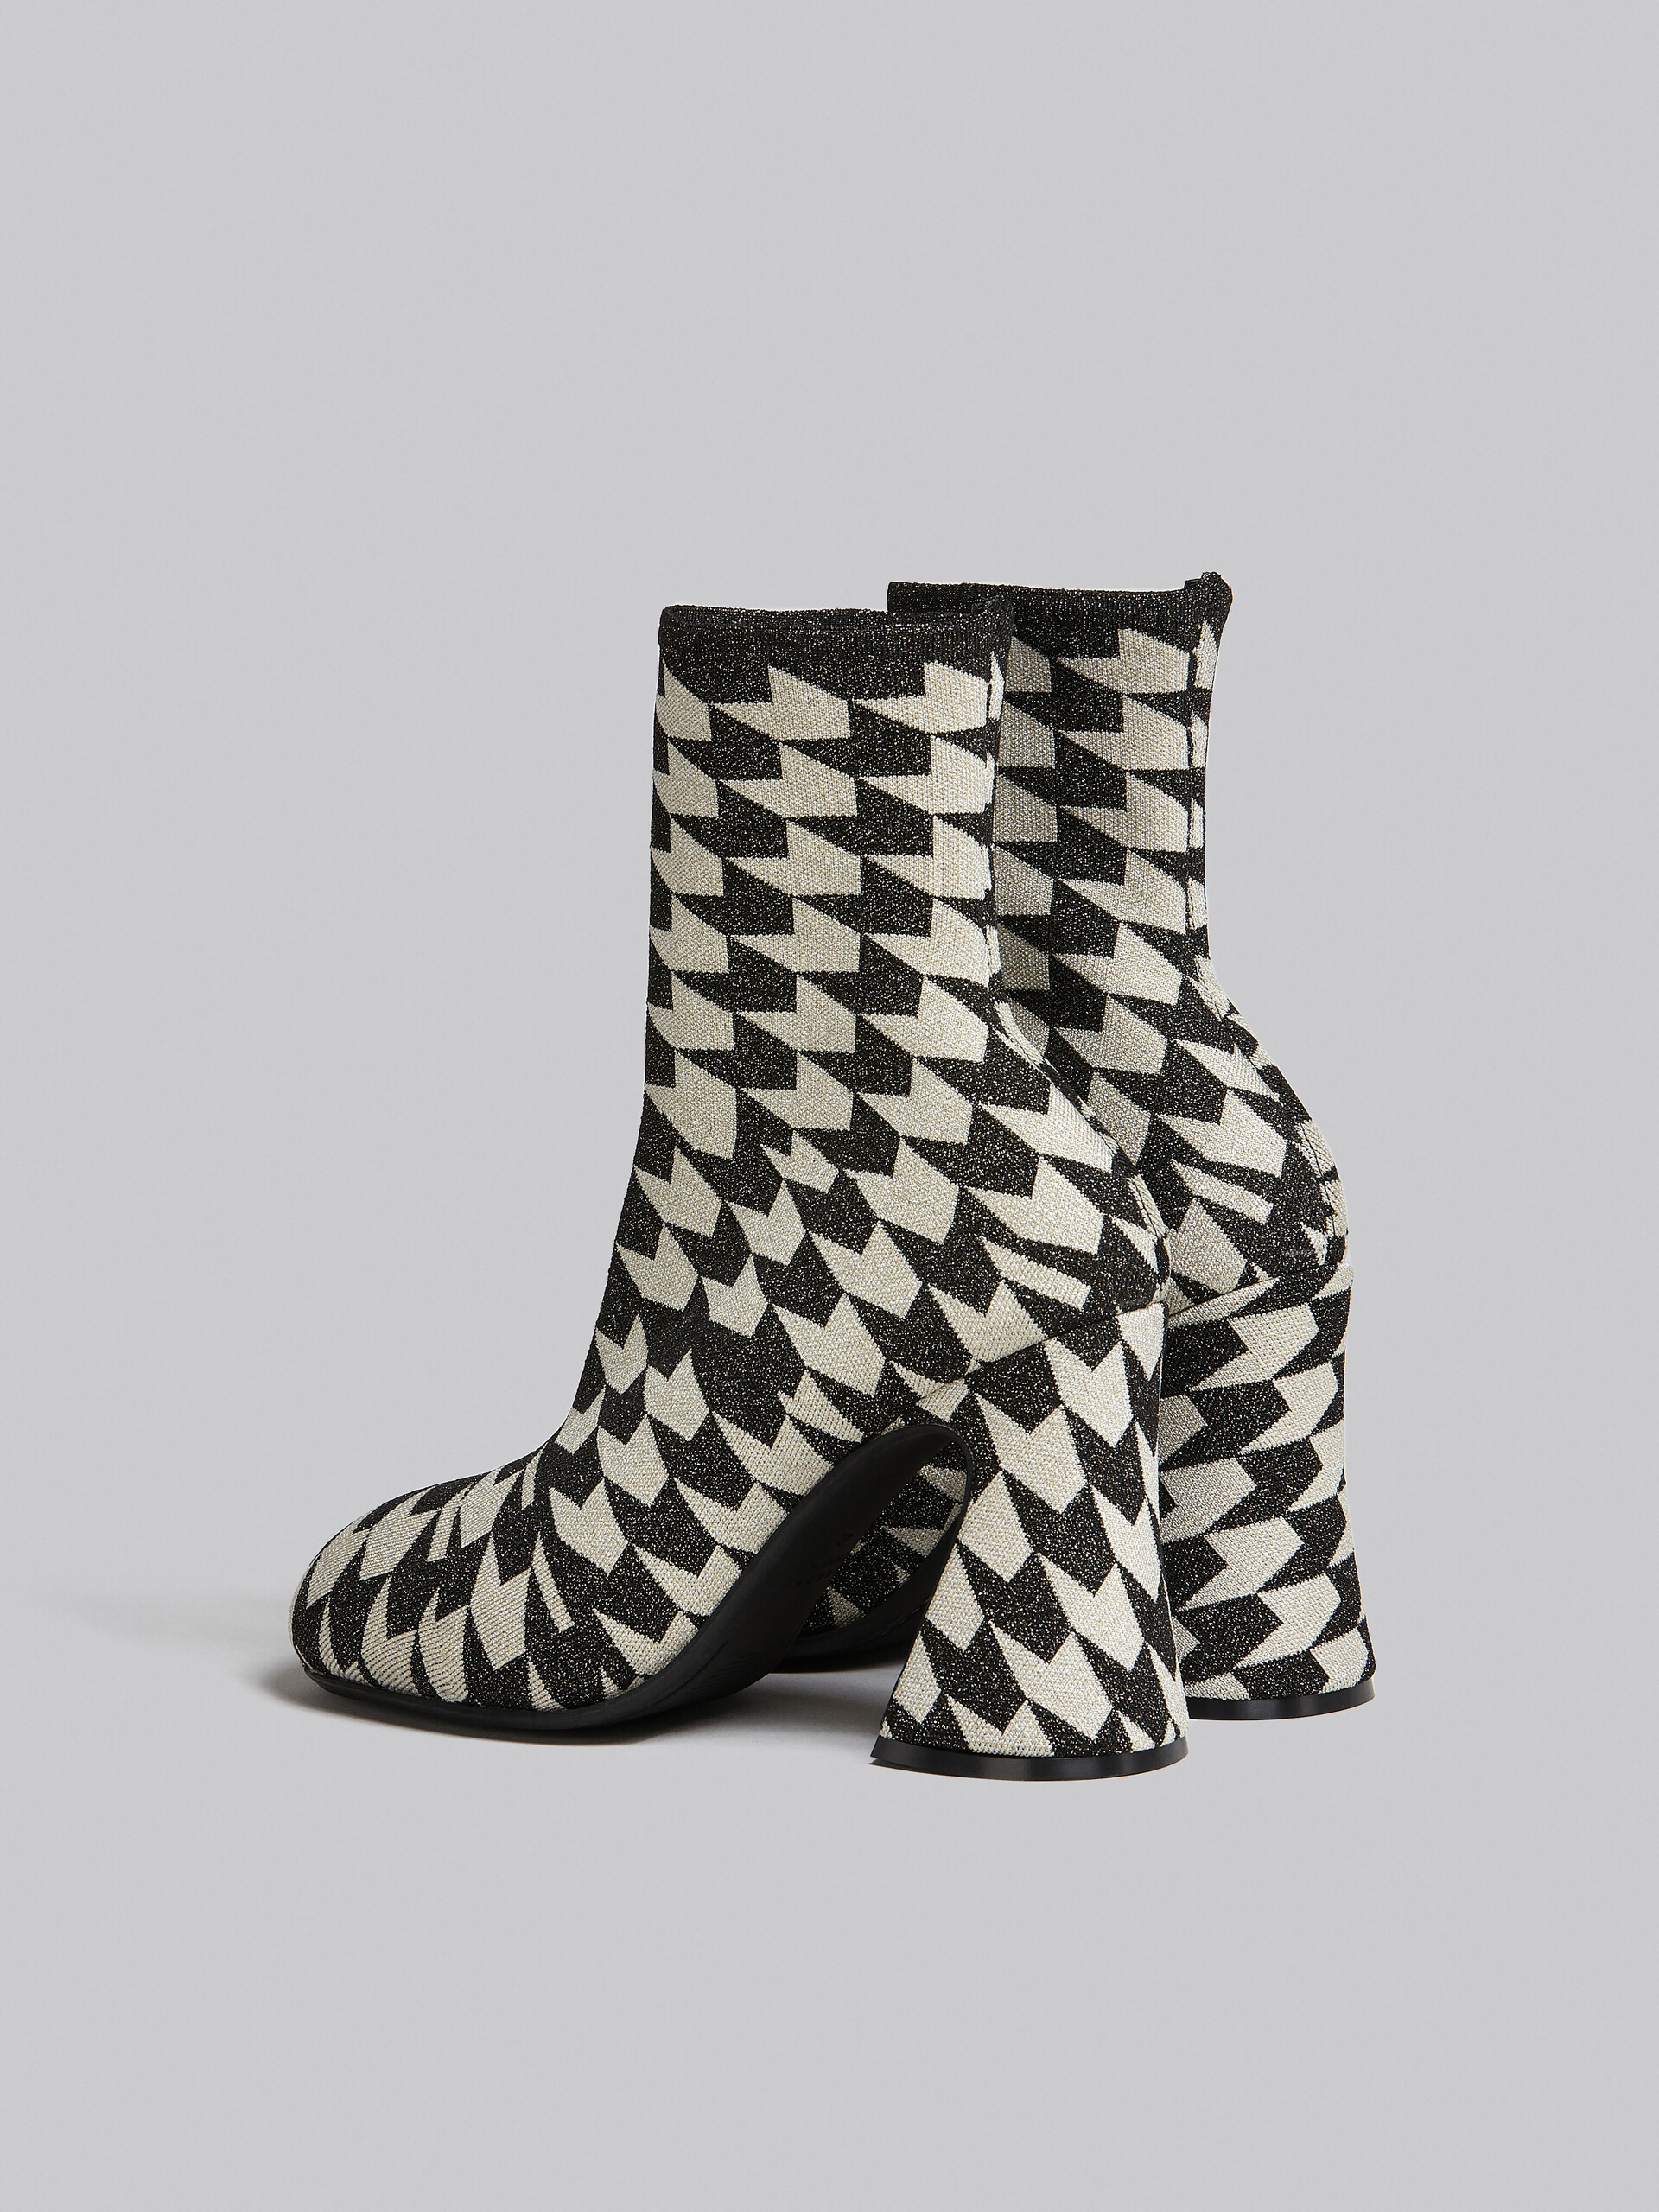 Black and white jacquard lurex ankle boot - Boots - Image 3